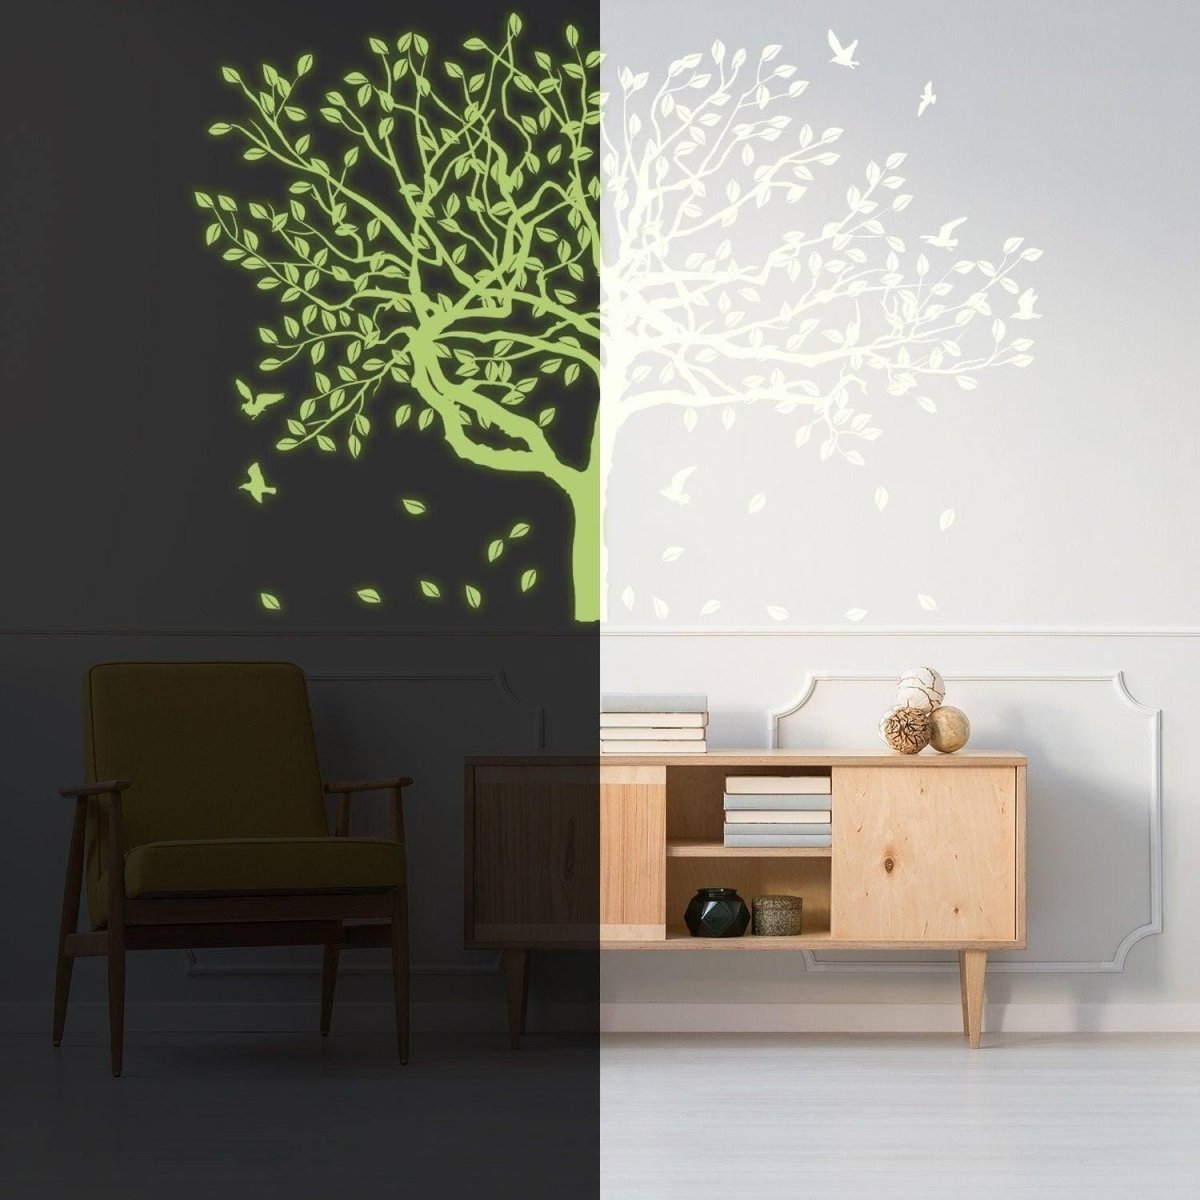 Luminescent Forest Glow-In-The-Dark Wall Decal - Transform any room with enchanting afterglow! - Decords